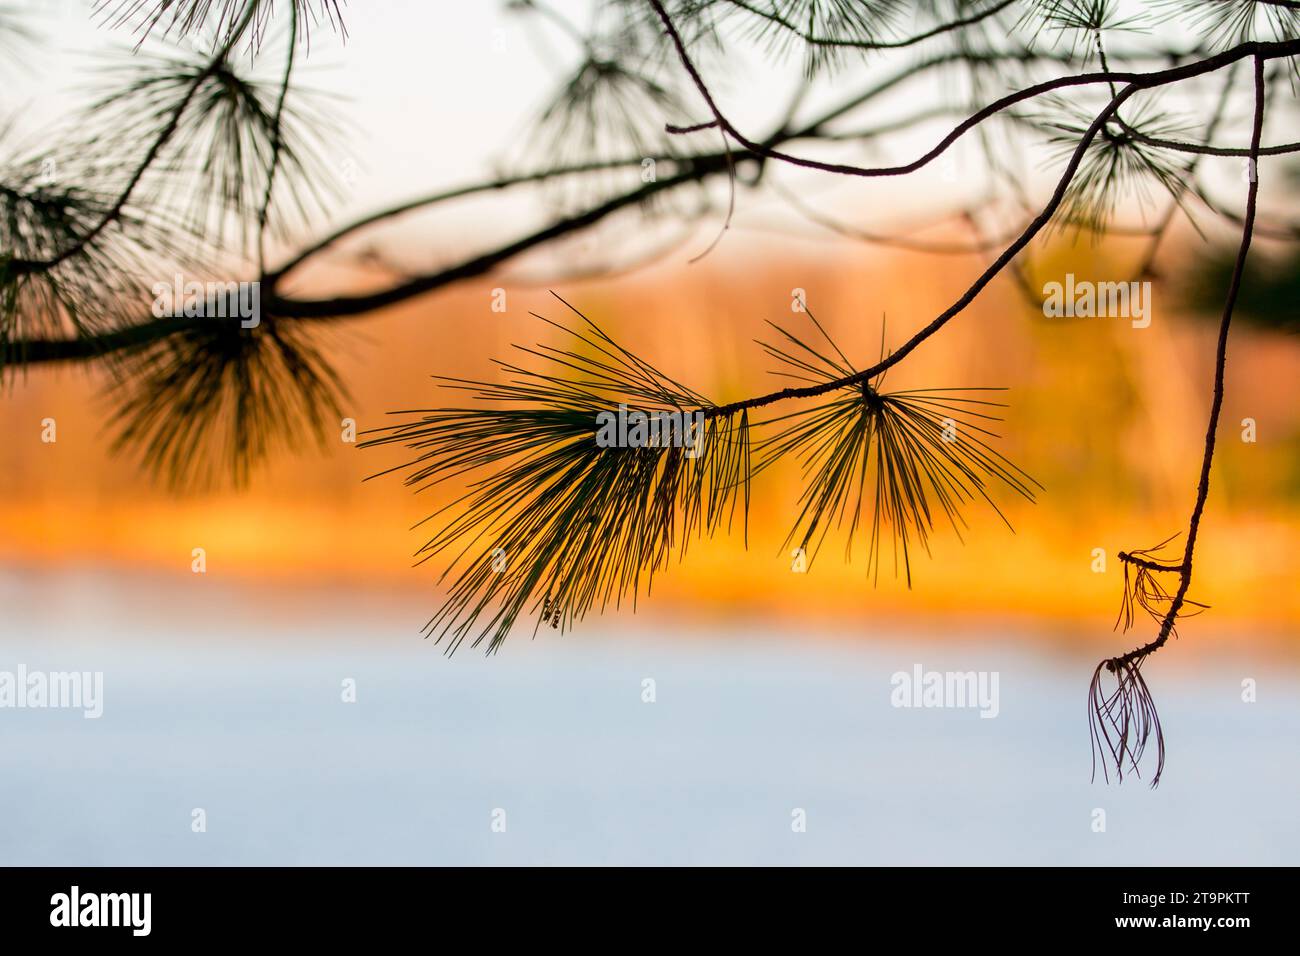 Eastern White Pine silhouette (Pinus strobus) against colorful blurry background of lake and trees in the autumn in northern Minn USA Stock Photo